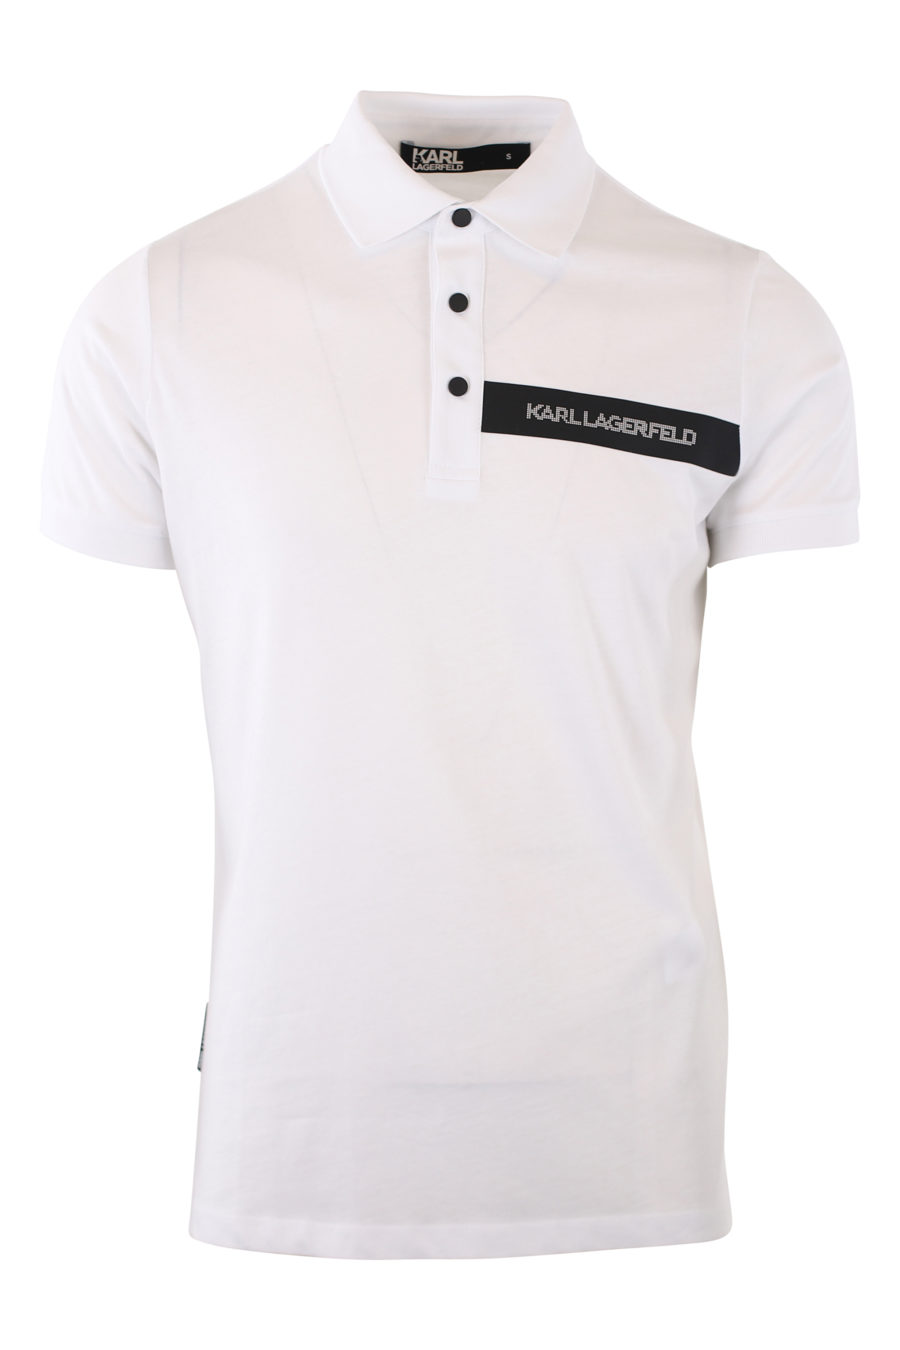 White polo shirt with black logo and buttons - IMG 2092